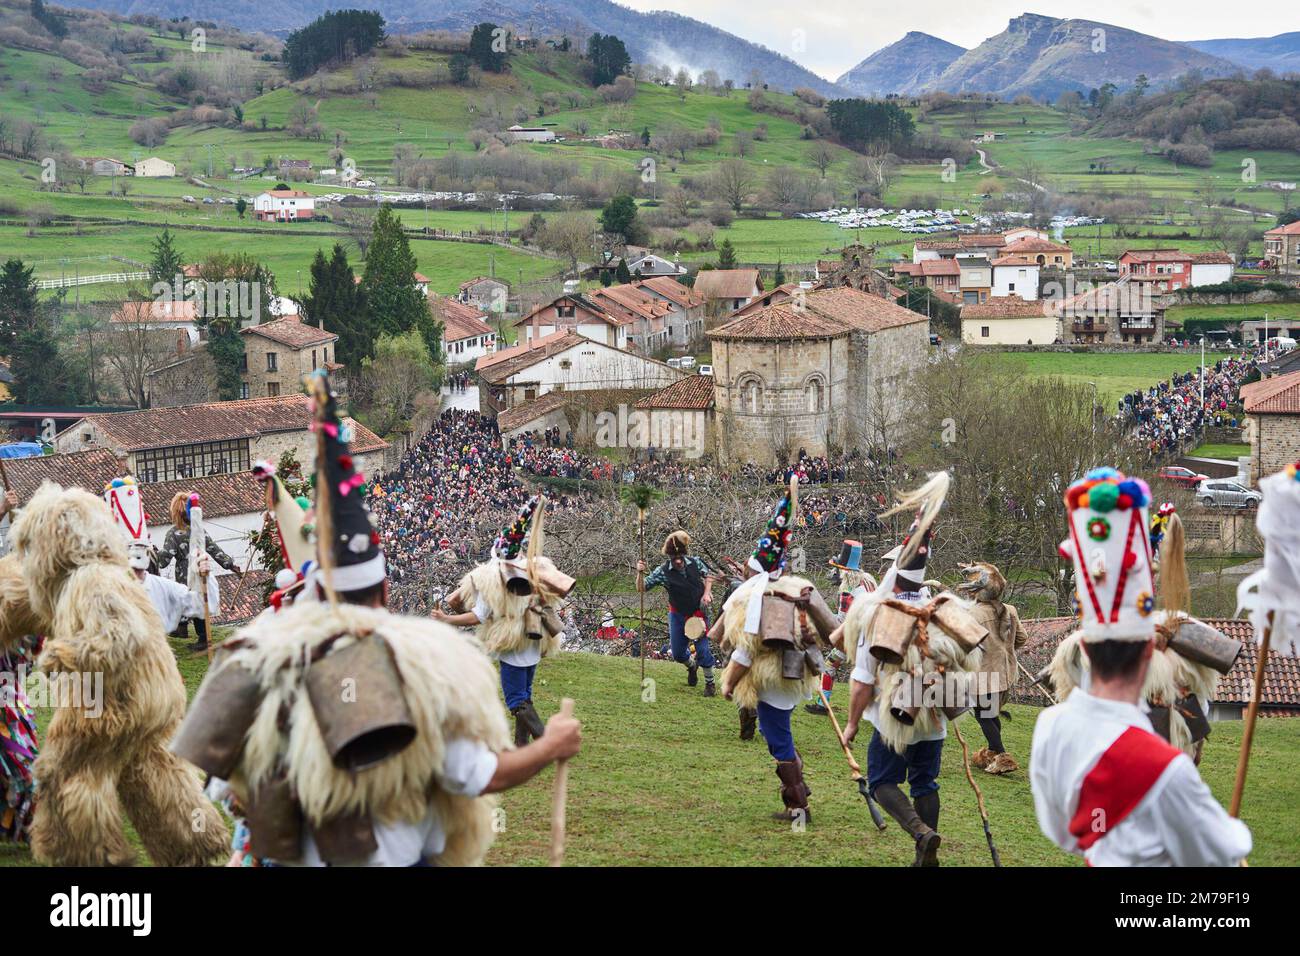 08 January 2023, Spain, Silió: Thousands of people from the church of the village watch the protagonists of the winter masquerade dance. The Vijanera, a traditional carnival in northern Spain, is an ethnographic celebration that takes place at the winter solstice. Villagers dressed in natural costumes dance loudly to welcome the New Year and drive away evil spirits. Photo: Felipe Passolas/dpa Stock Photo